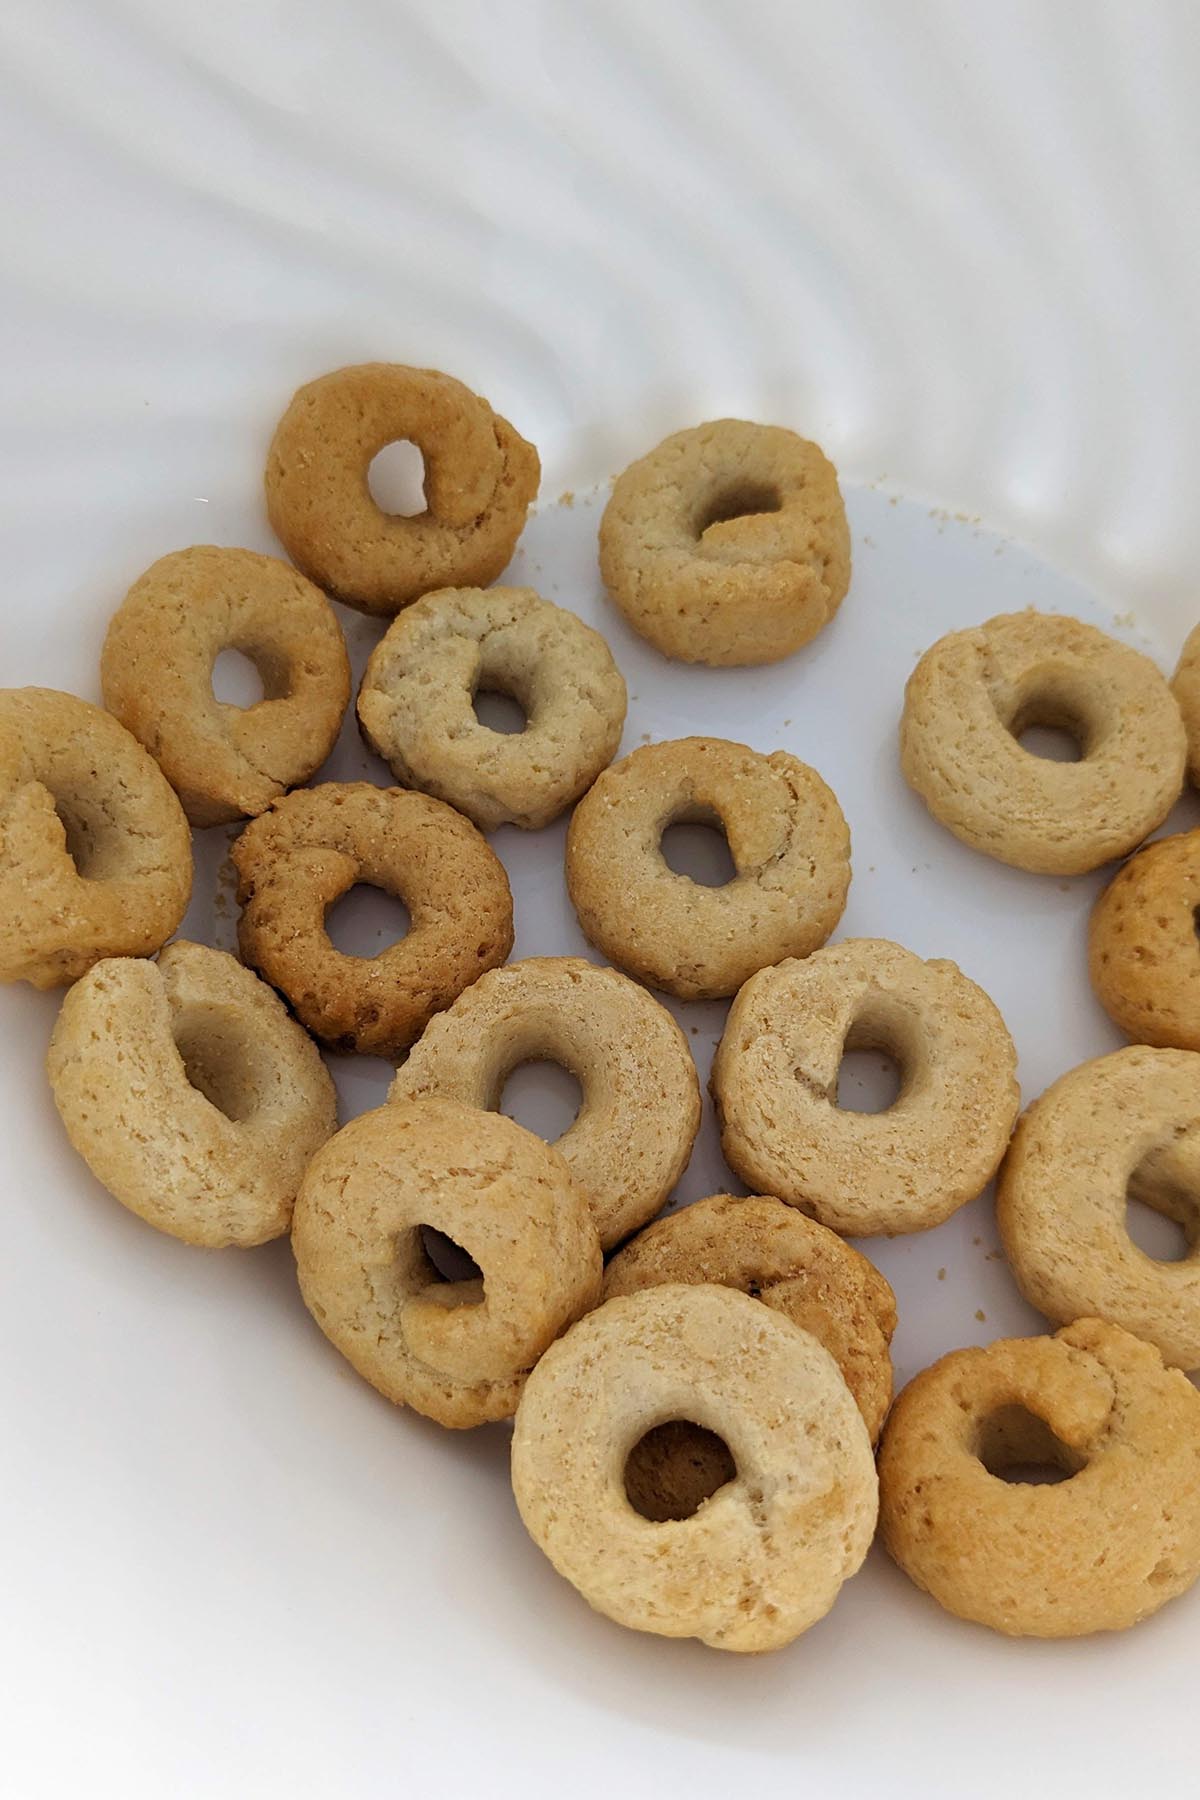 circular crackers in a white bowl.